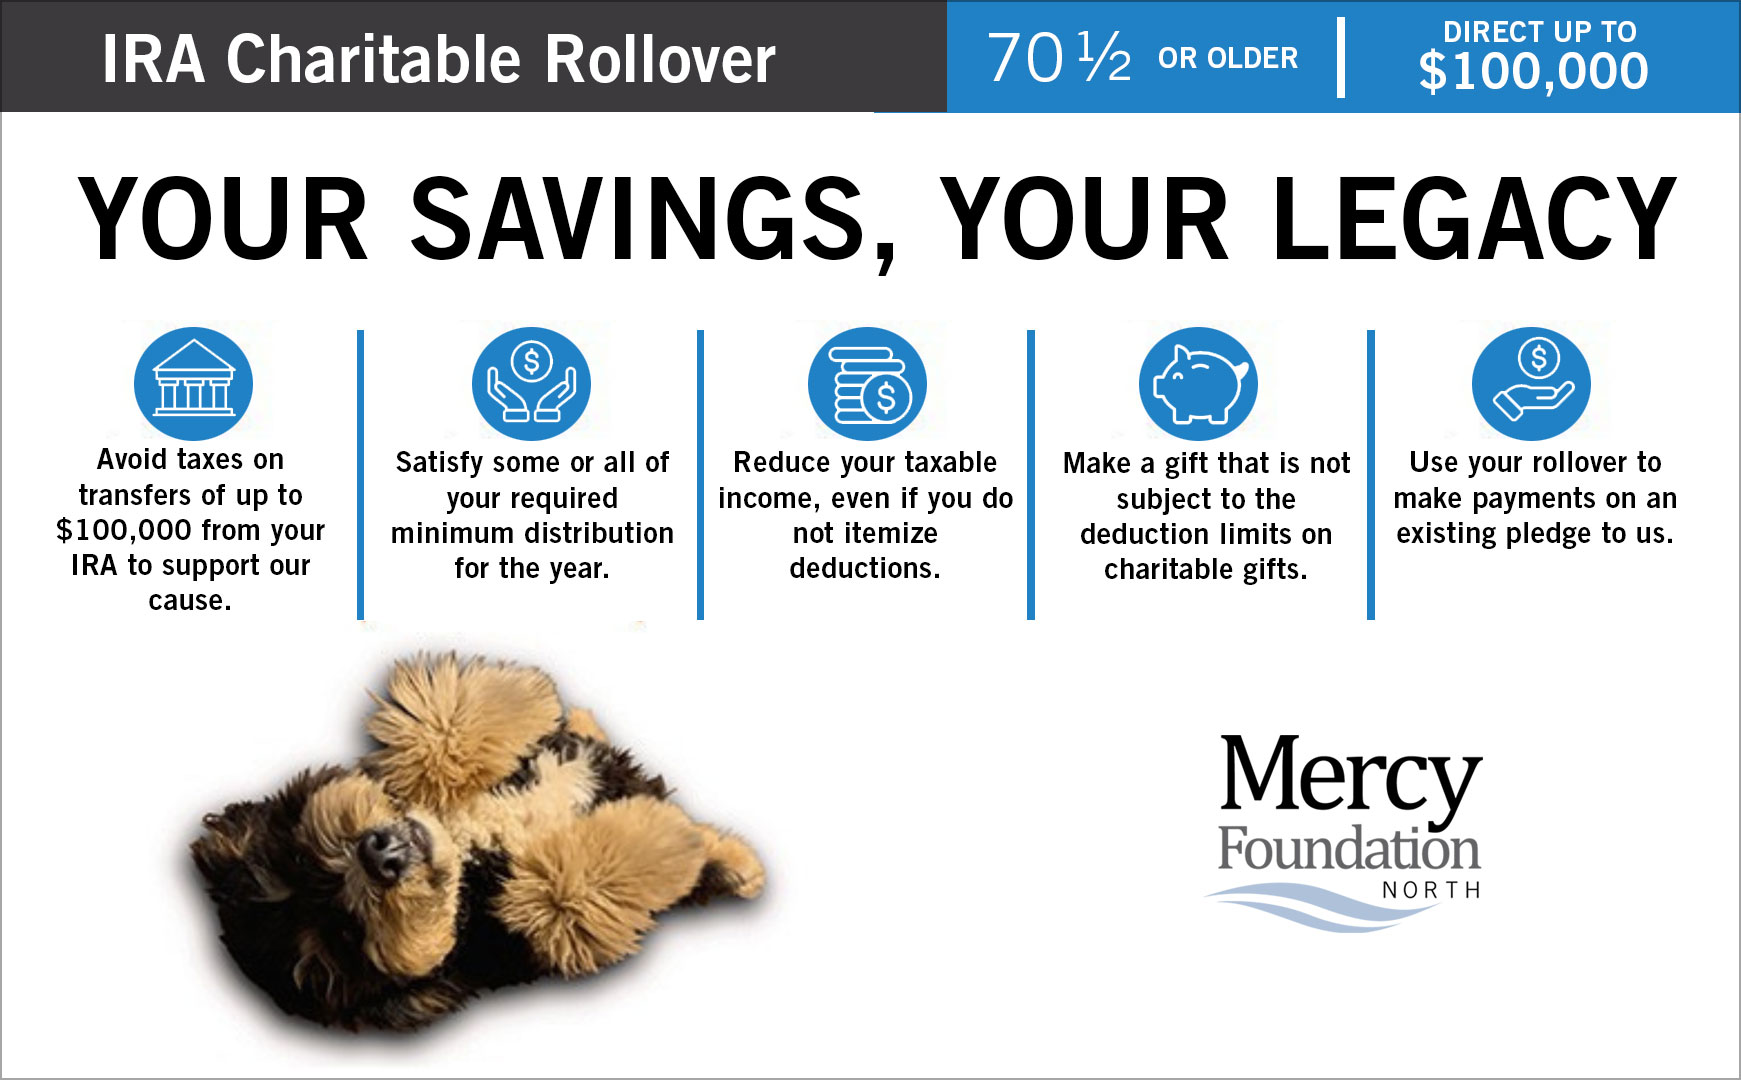 IRA Charitable Rollover Graphic with otter and helpful textual info